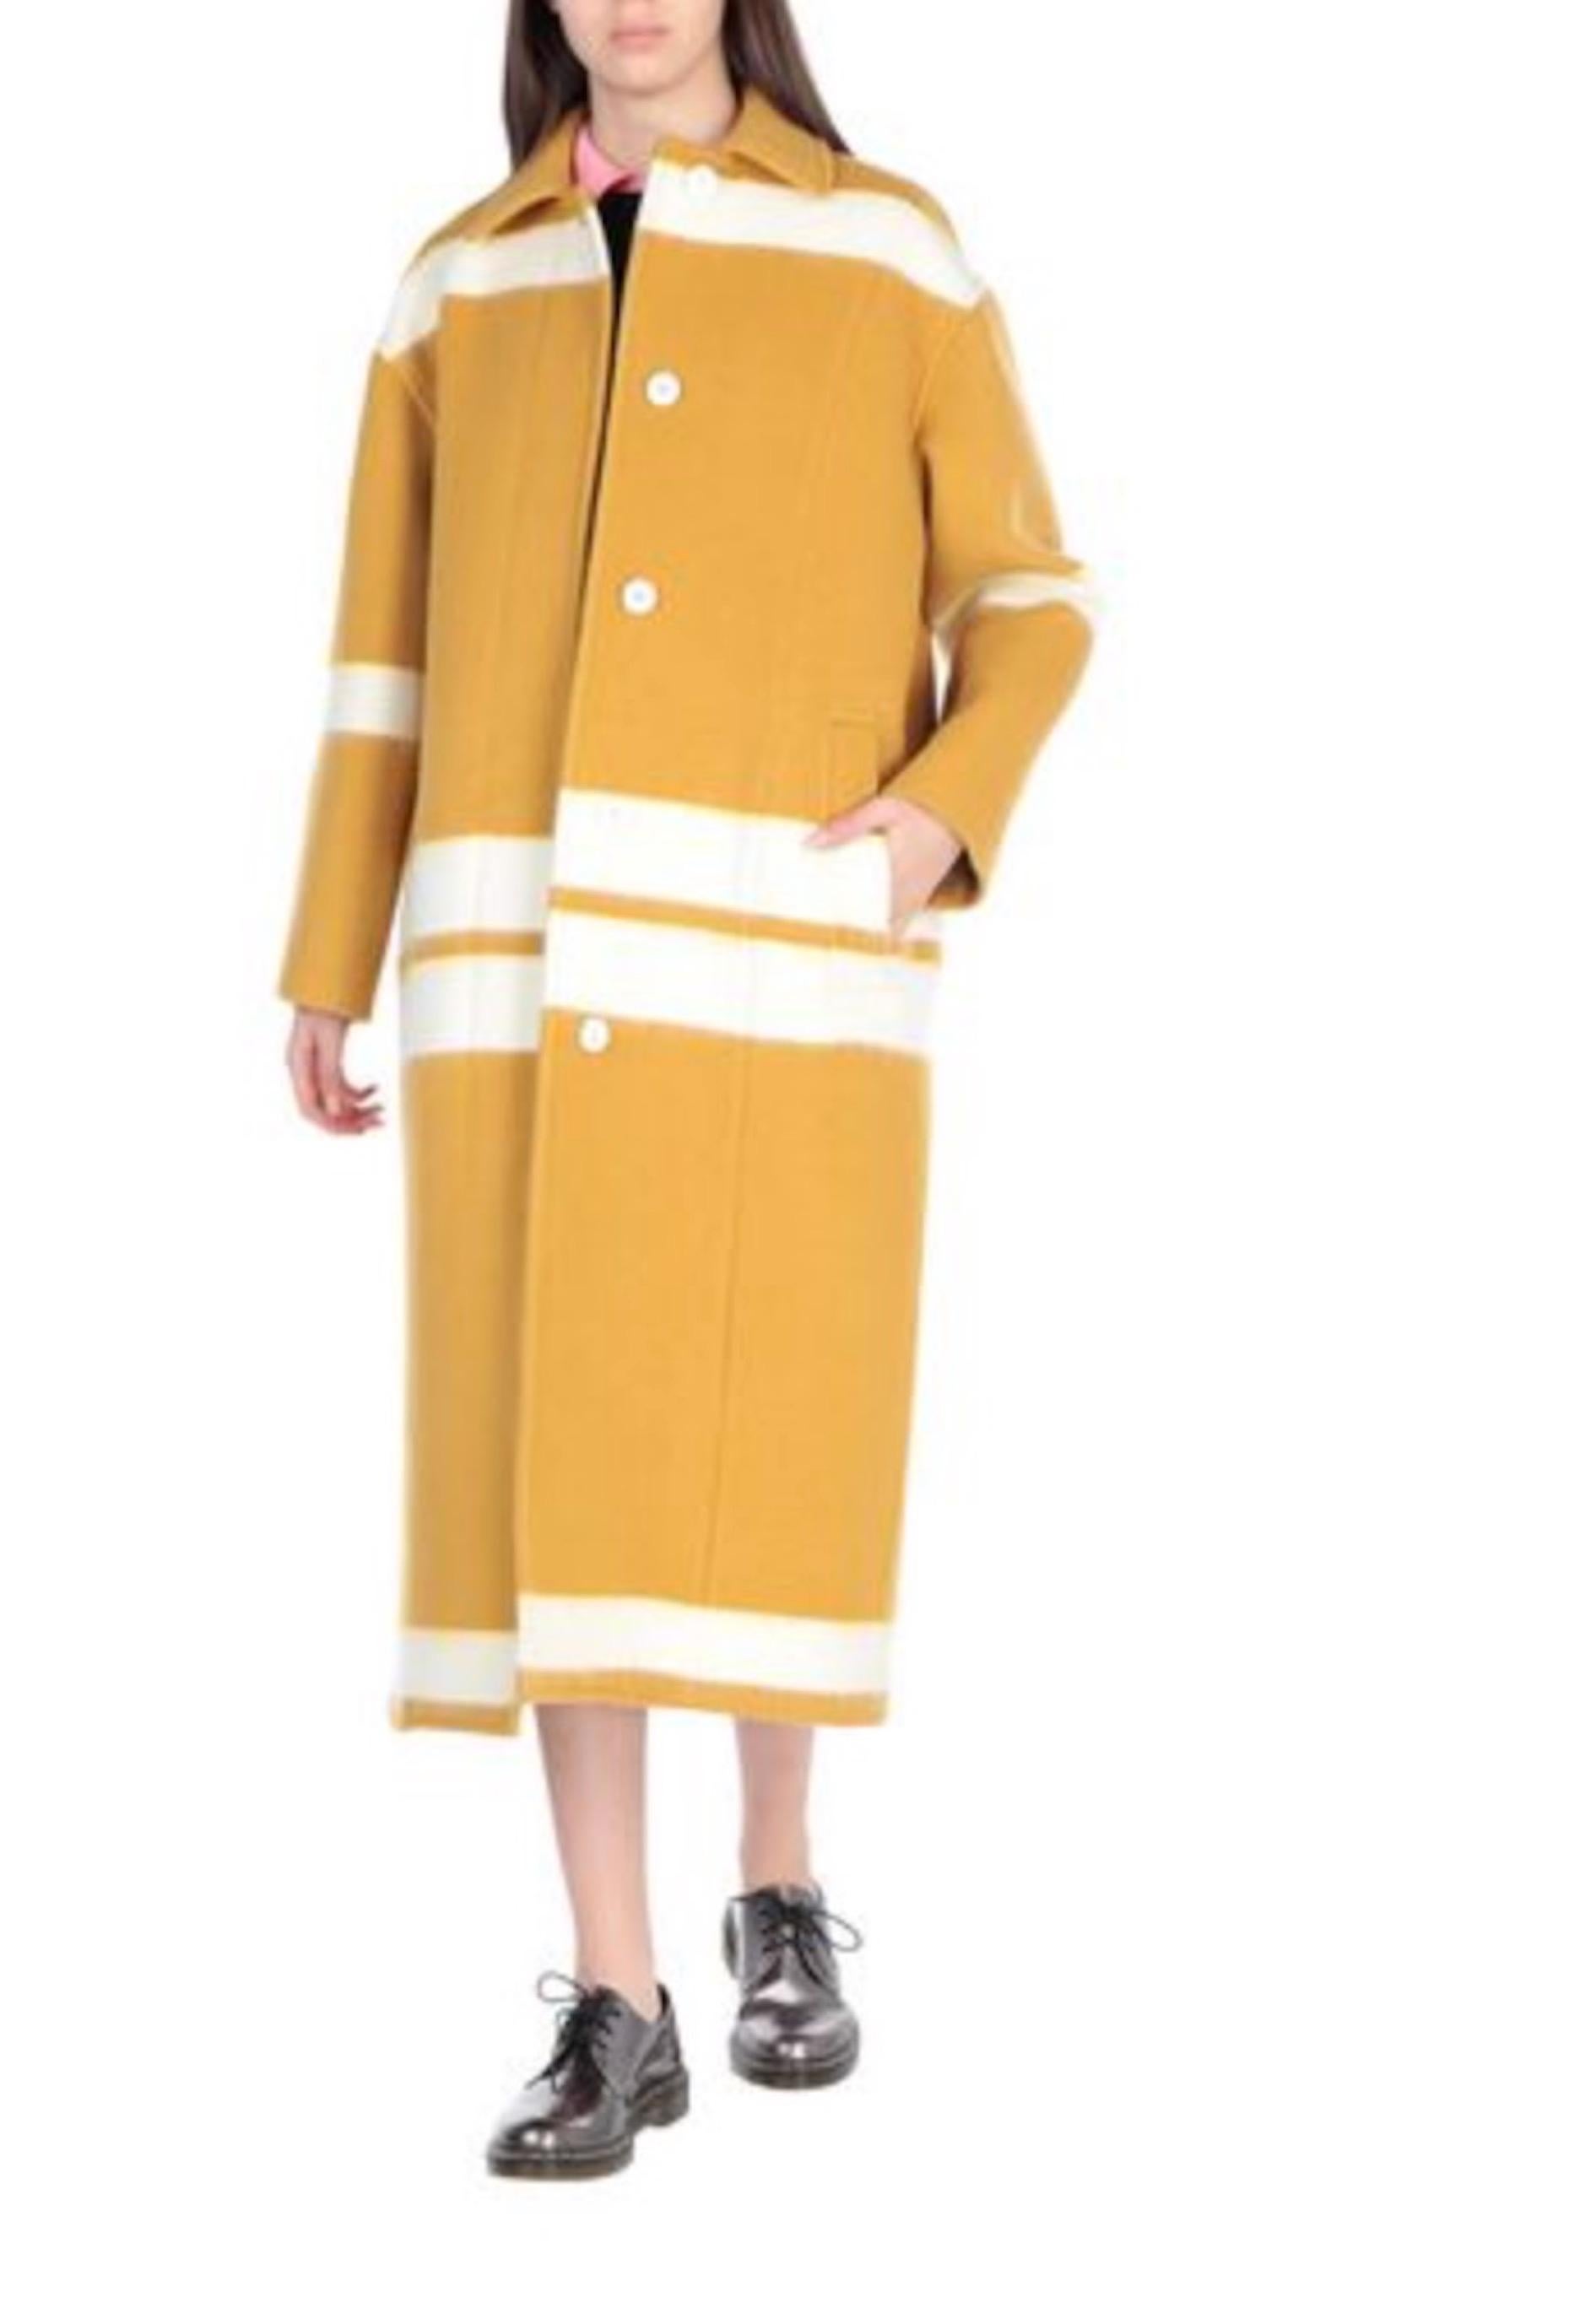 Celine NEW Mustard White Striped Oversize Wool Cashmere Winter Jacket Long Trench Pea Coat 

Size FR 38
Wool and Cashmere blend
Fully lined
Button closure
Total length 47